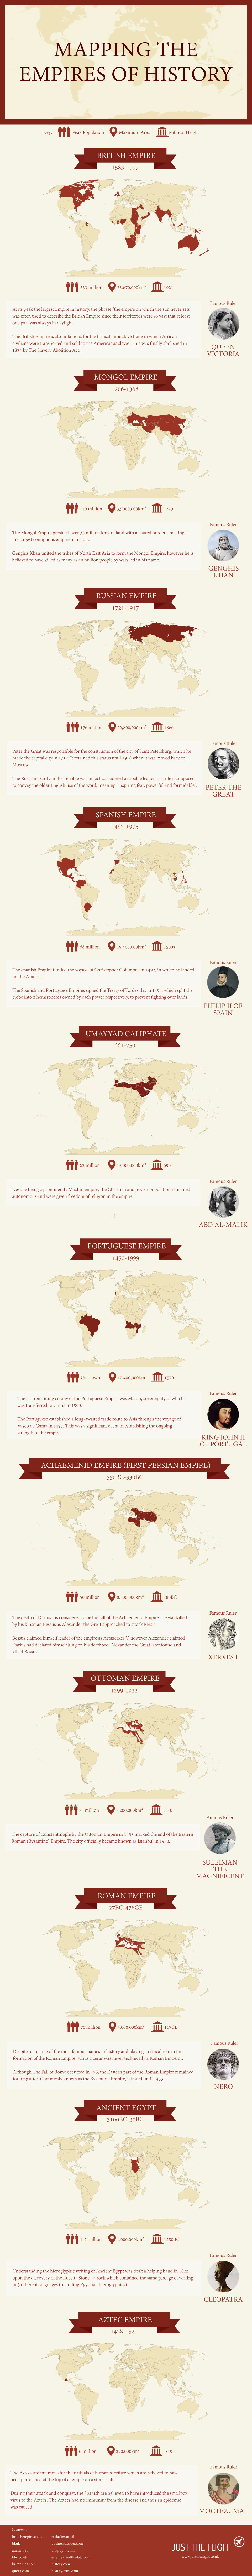 The Greatest Empires in History